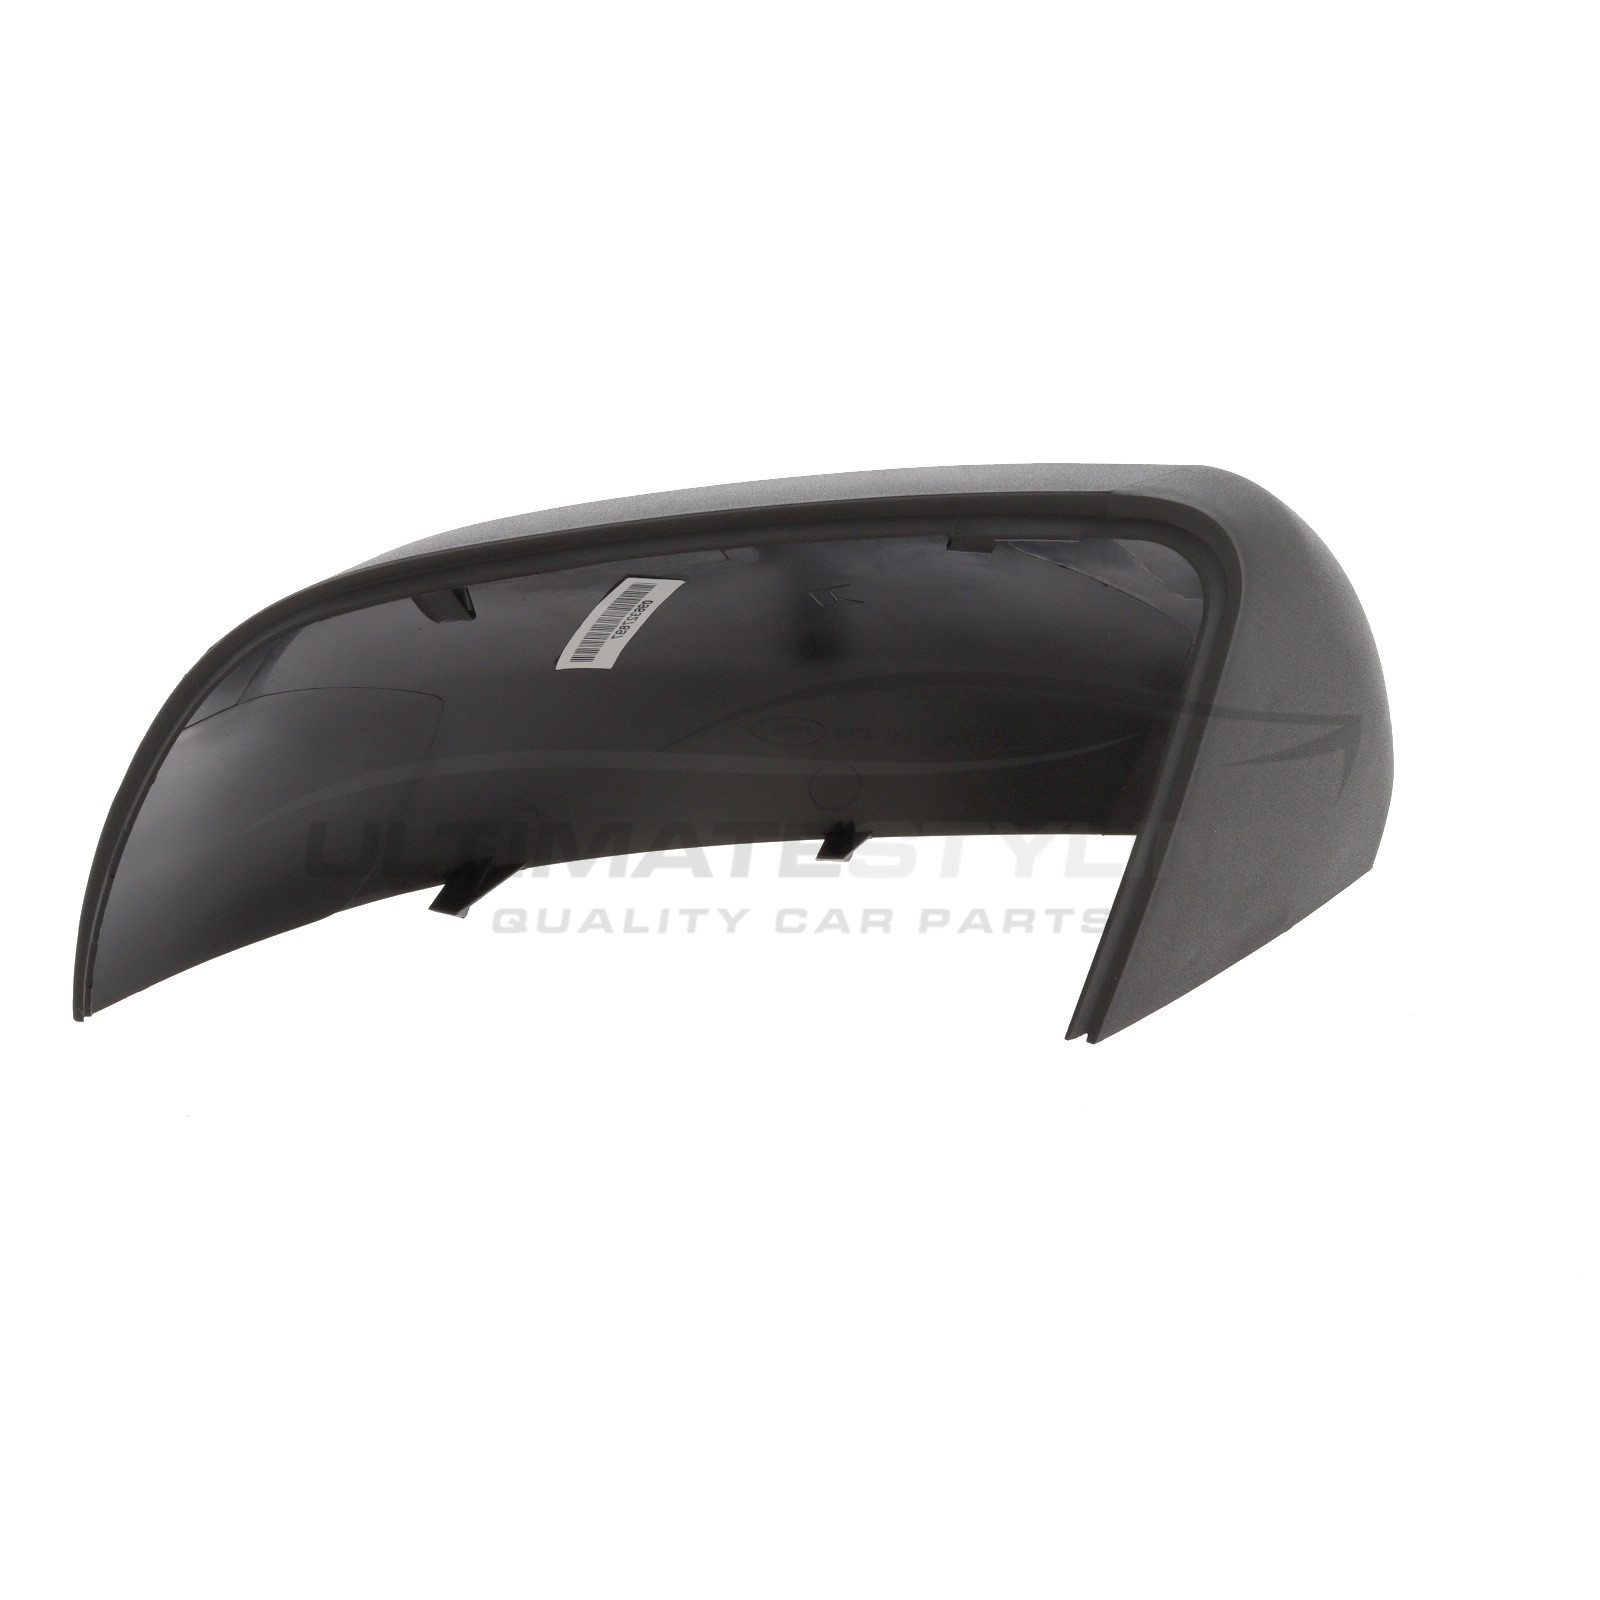 Mercedes Benz Vito Wing Mirror Cover - Passenger Side (LH) - Black -  Textured